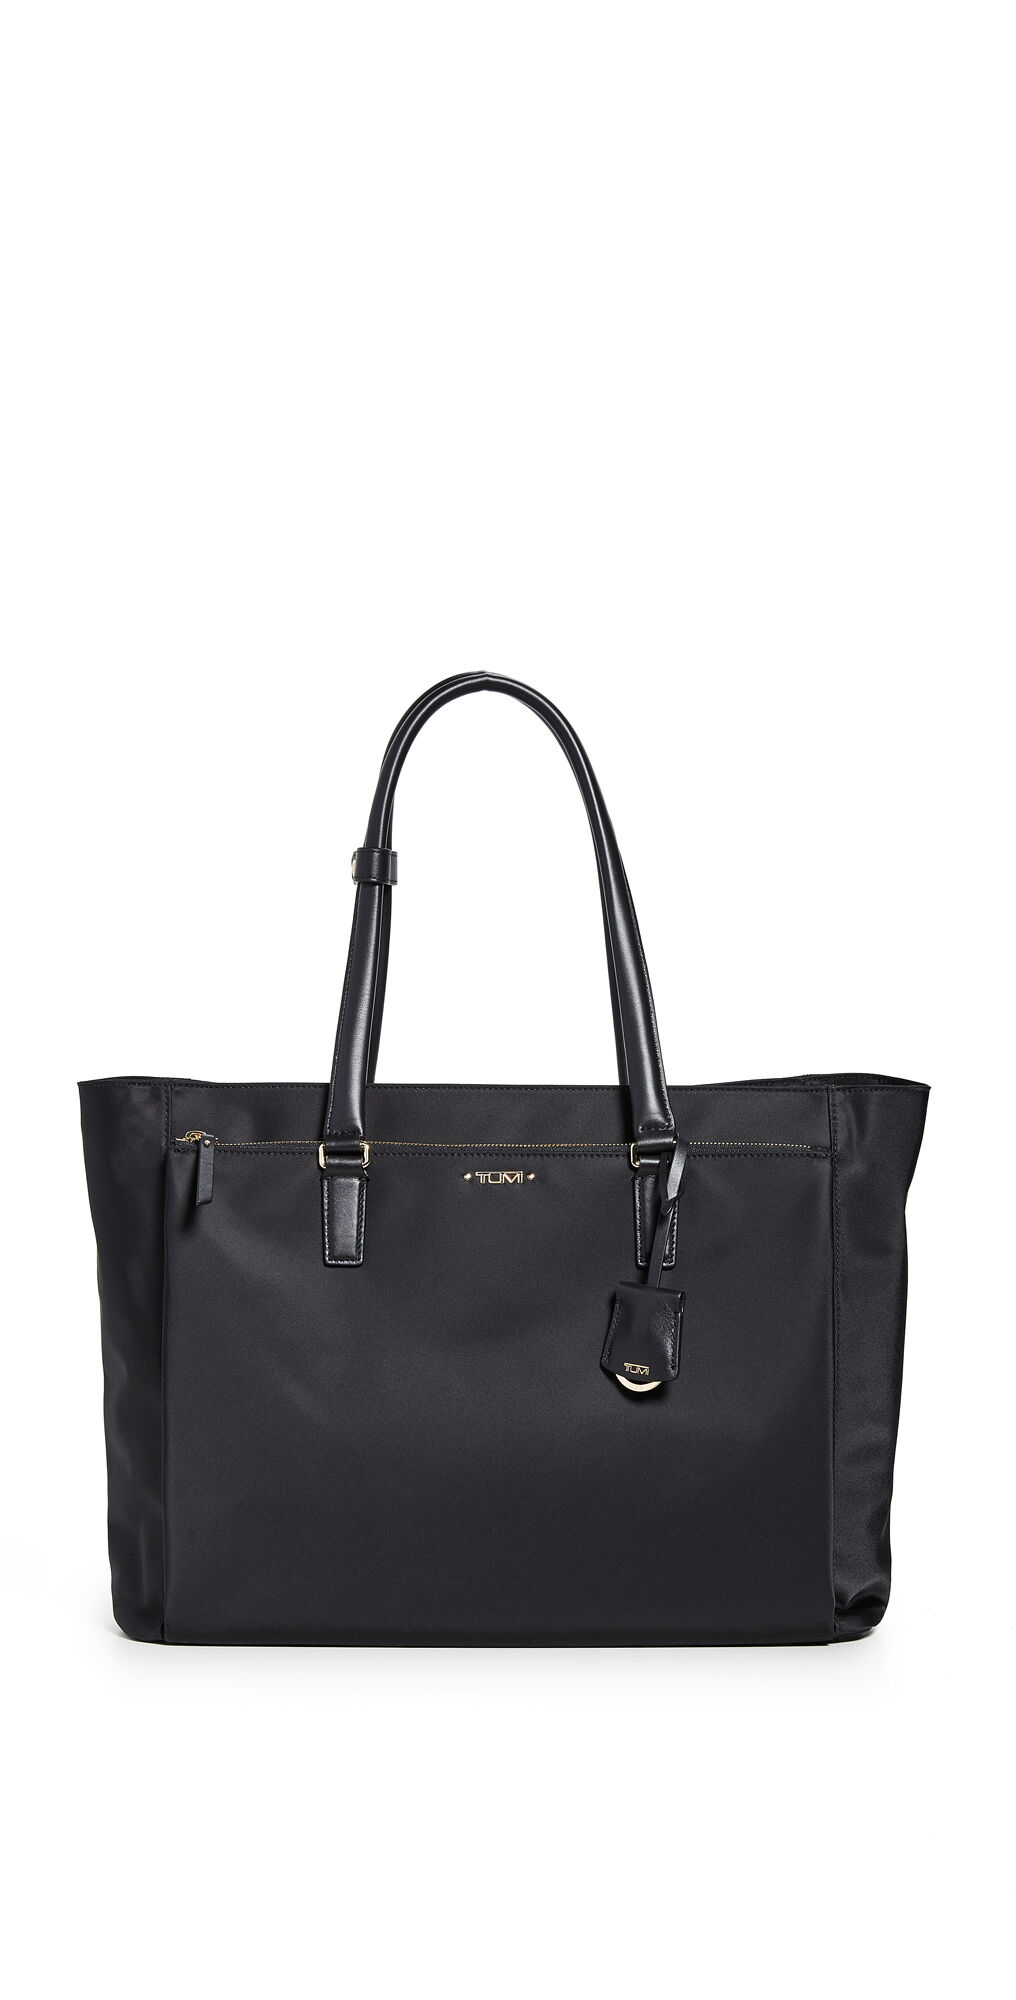 Tumi Bailey Business Tote Black One Size  Black  size:One Size